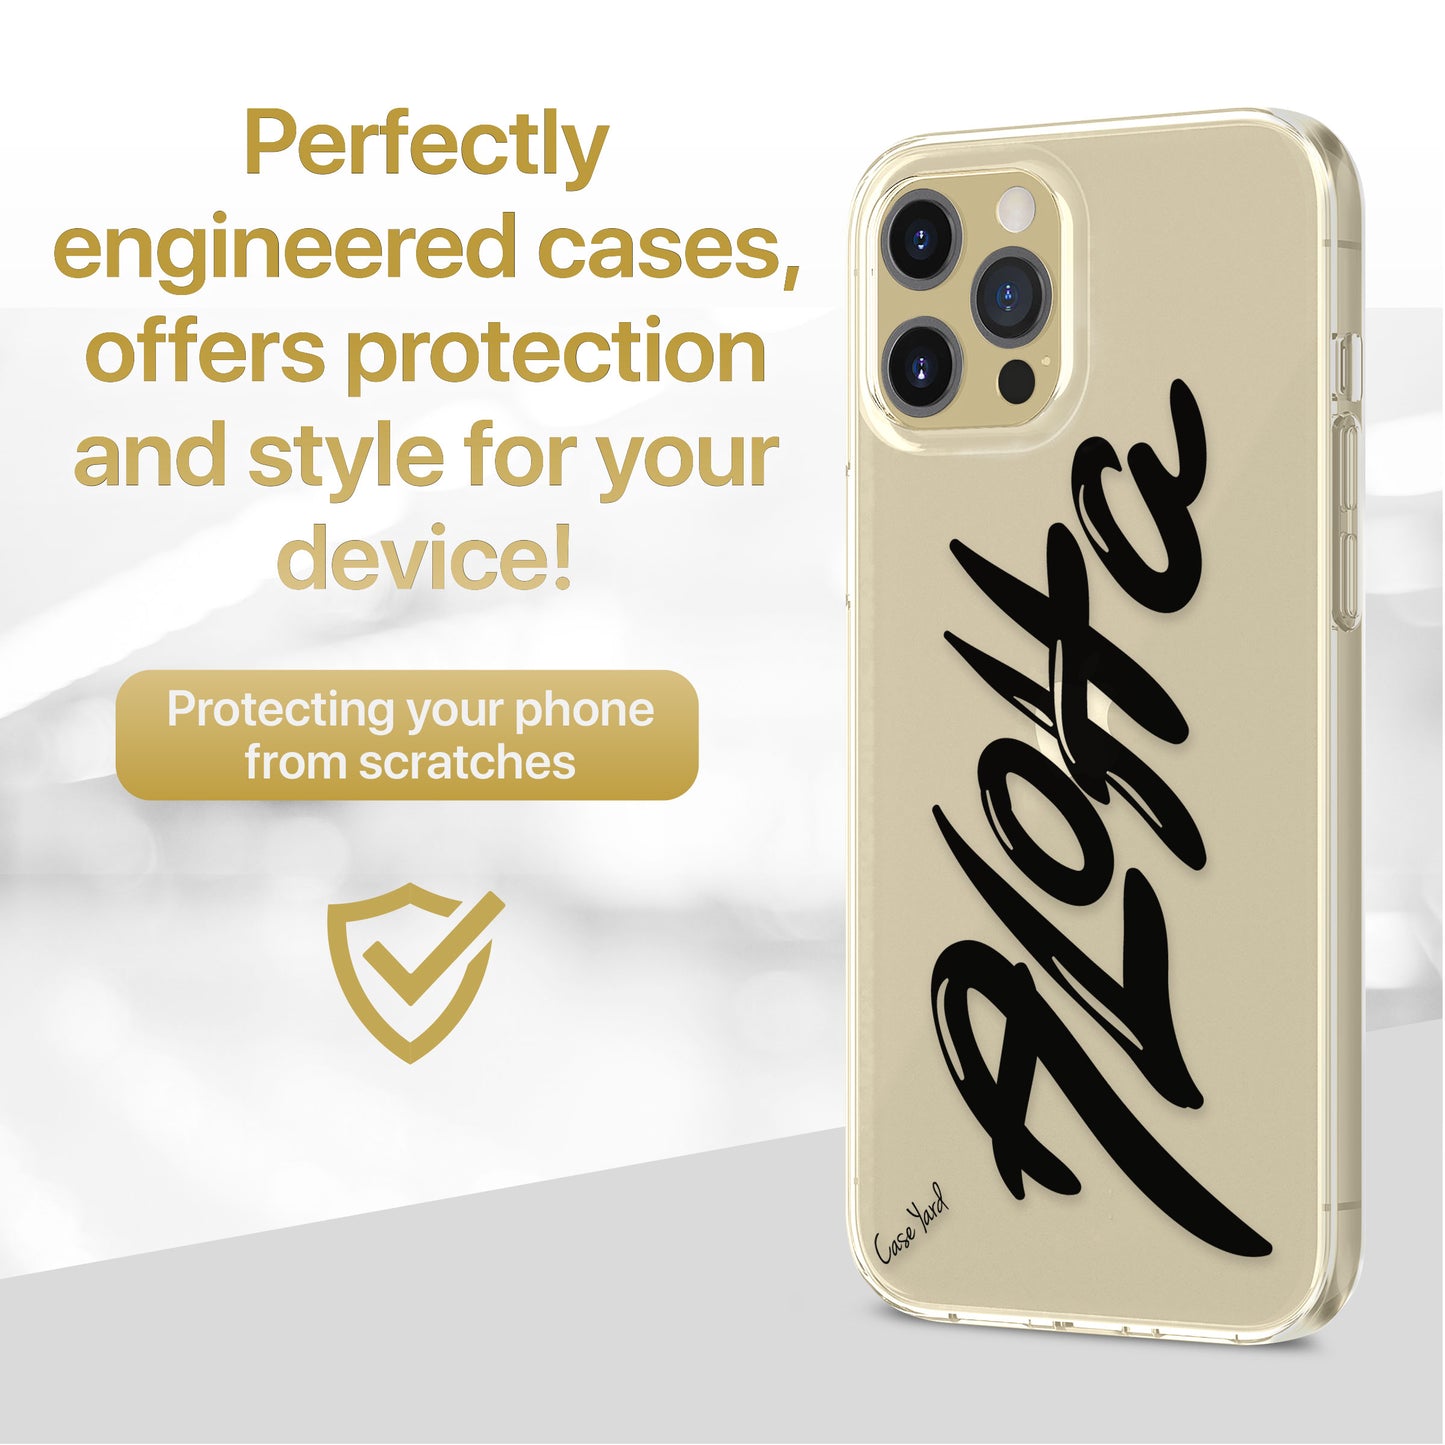 TPU Clear case with (Aloha) Design for iPhone & Samsung Phones